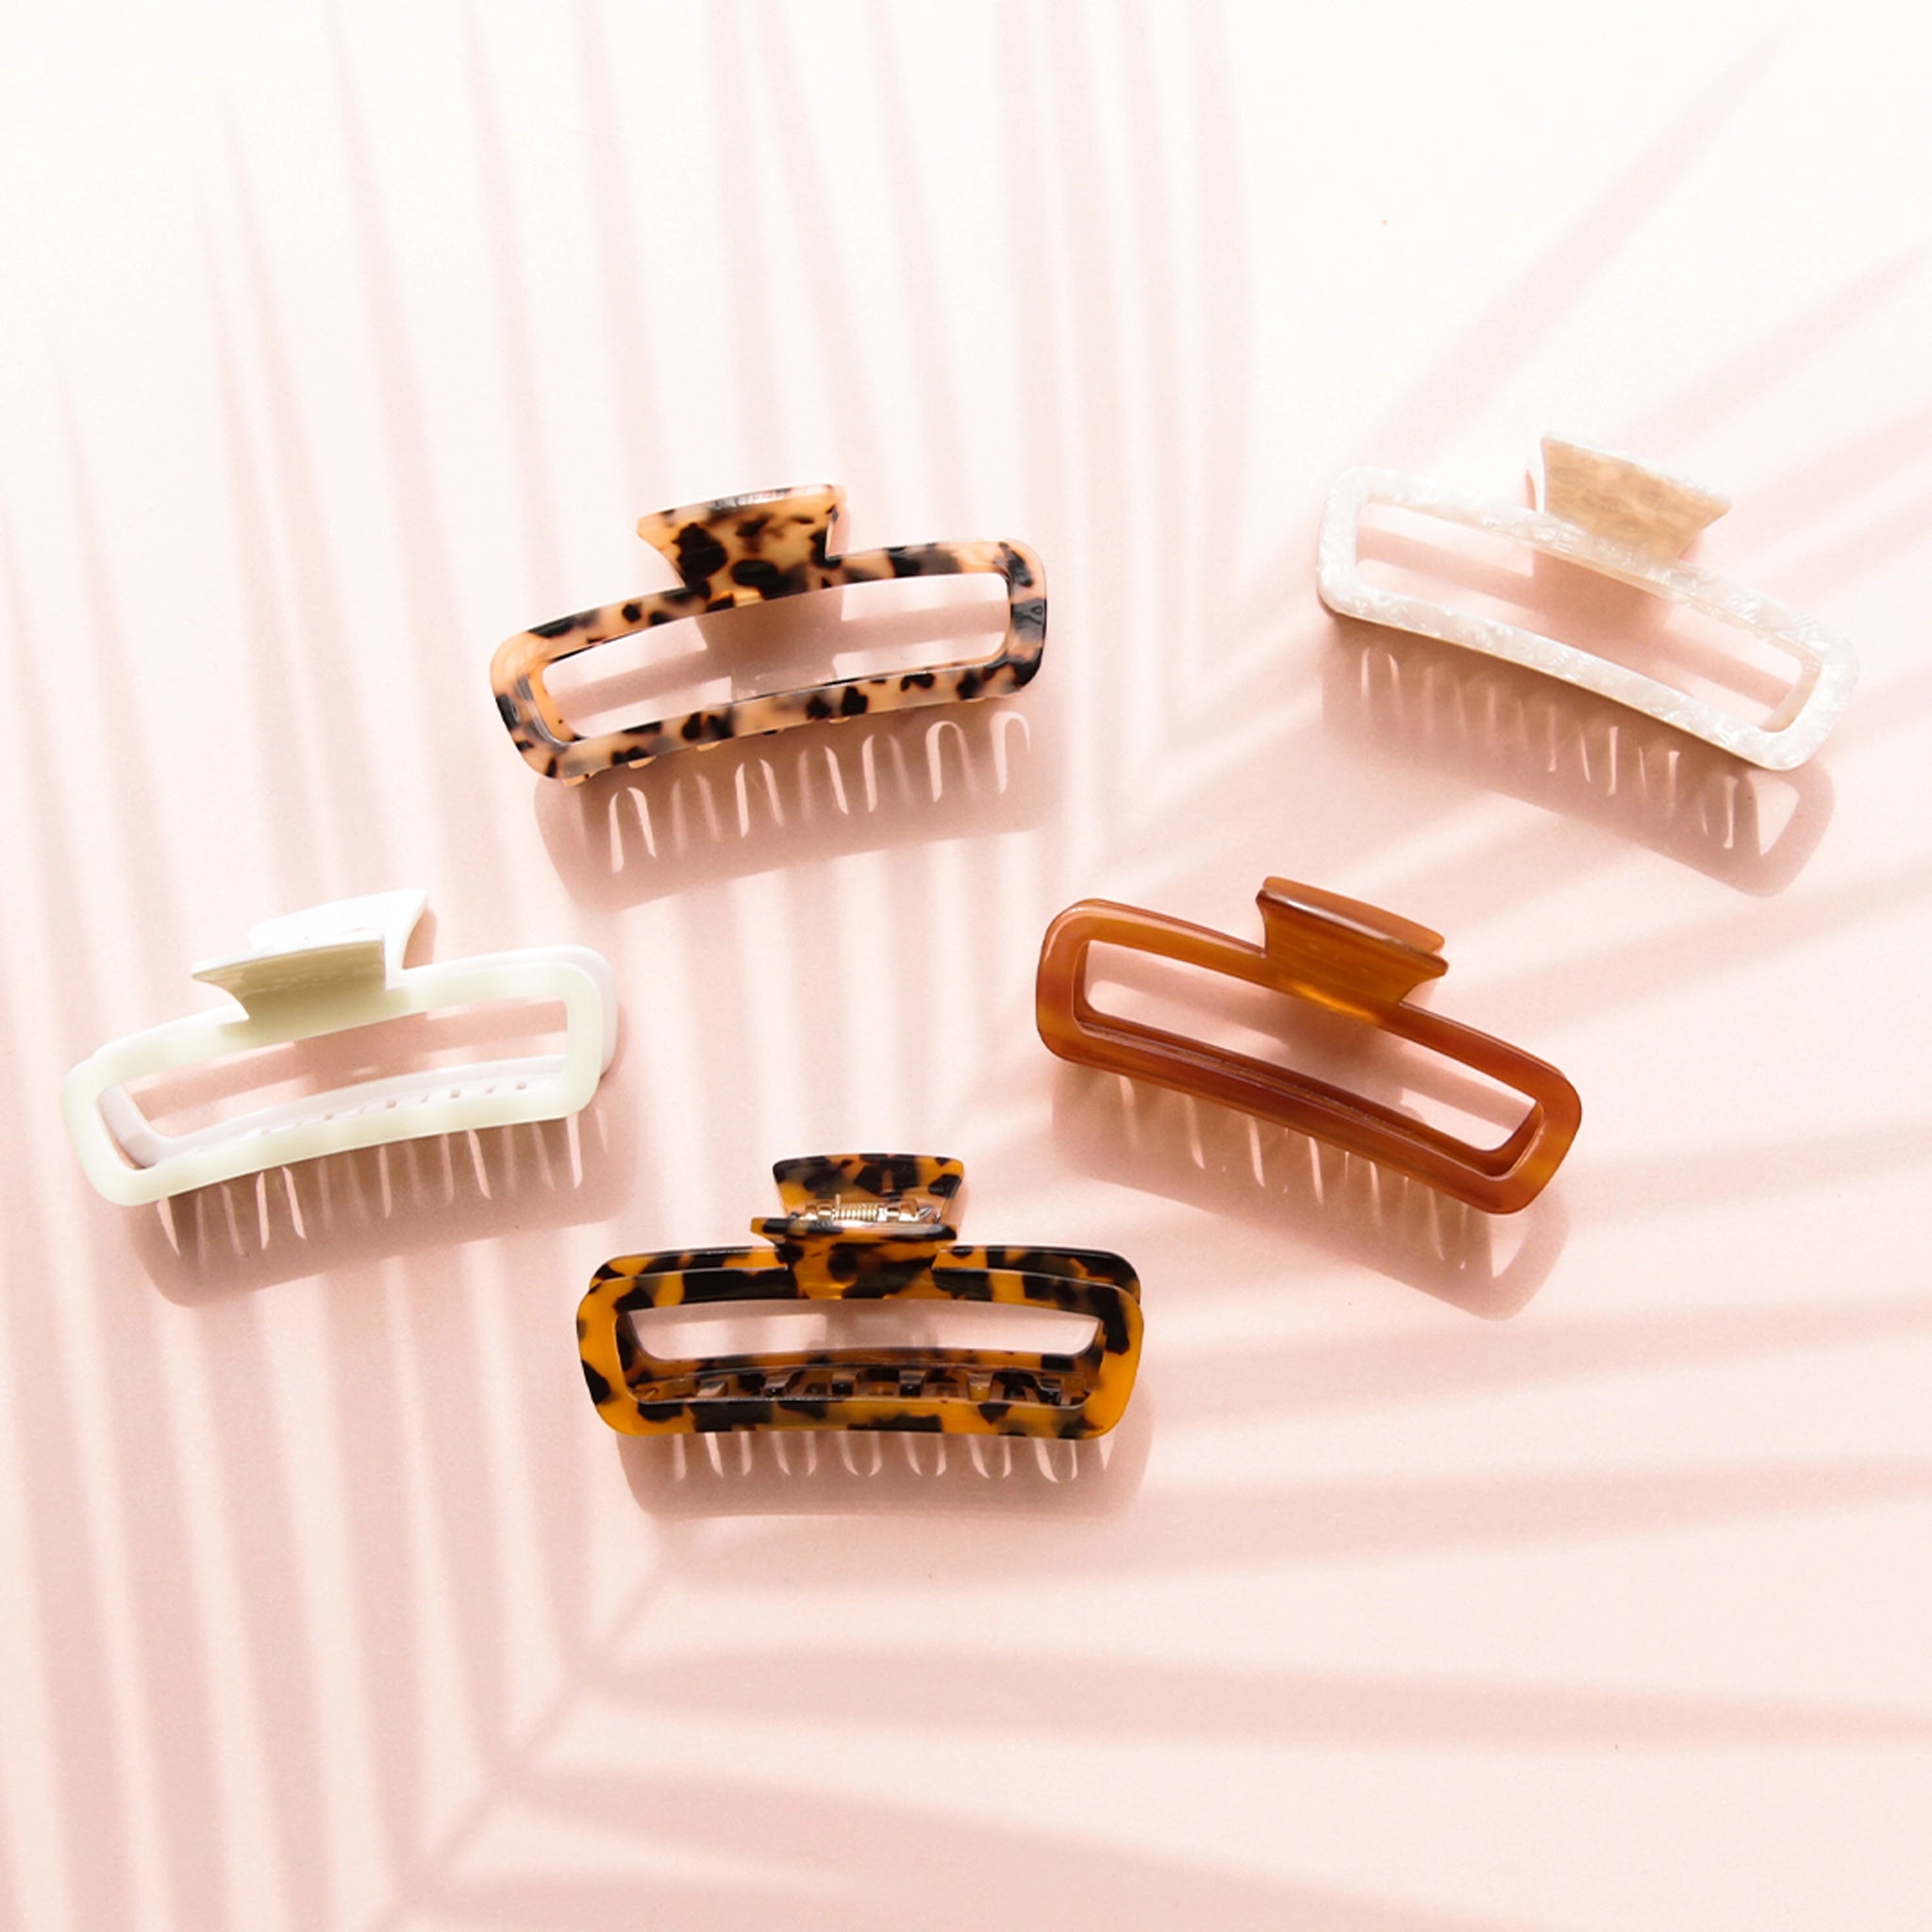 On a light pink background is a variety of rectangle claw clips in tortoise shades, an amber color and two different whites.